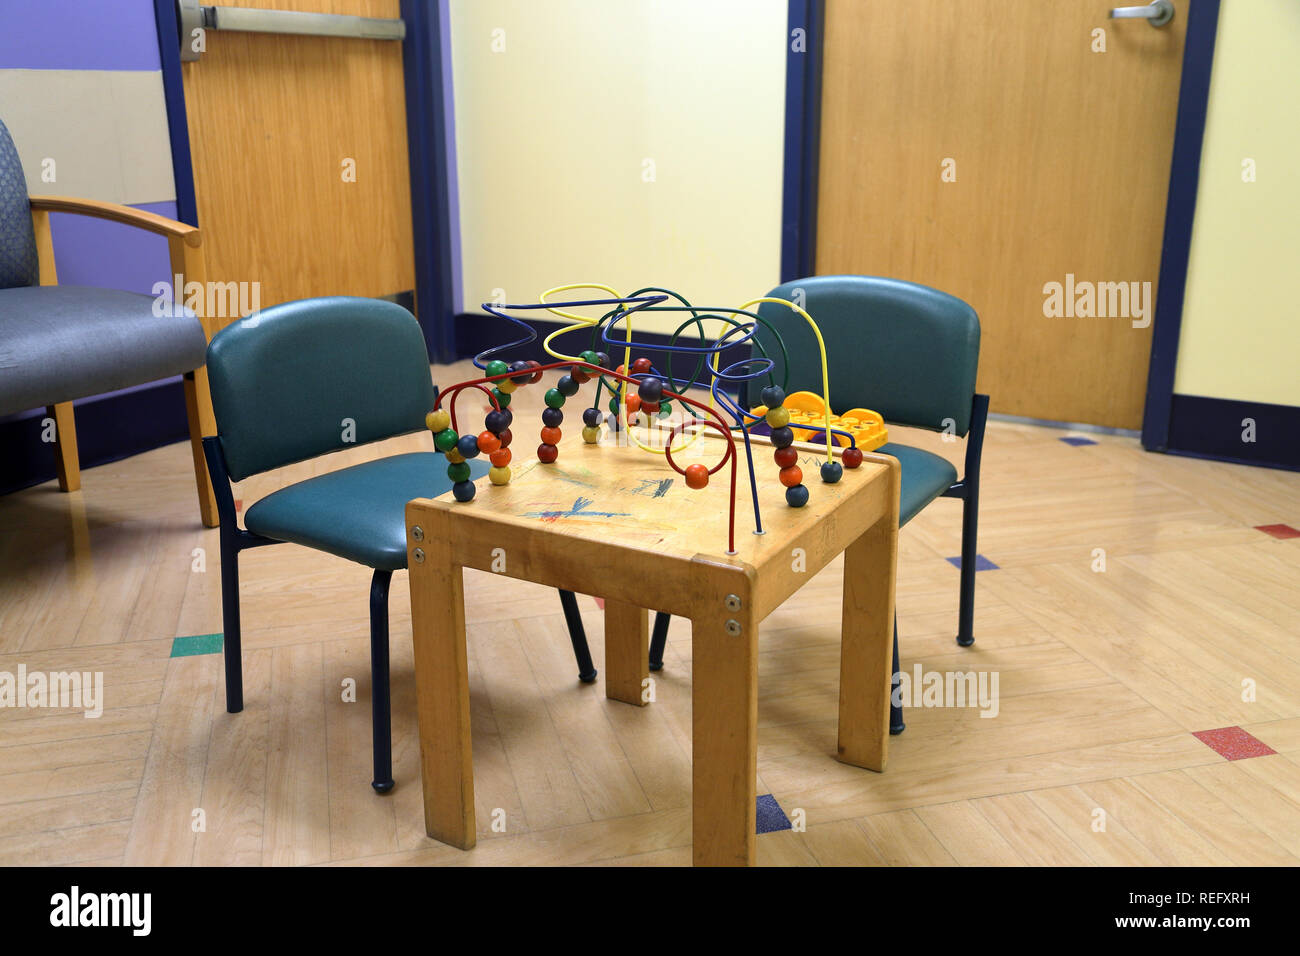 Chirldren's clinic waiting room of a medical office with toys Stock Photo